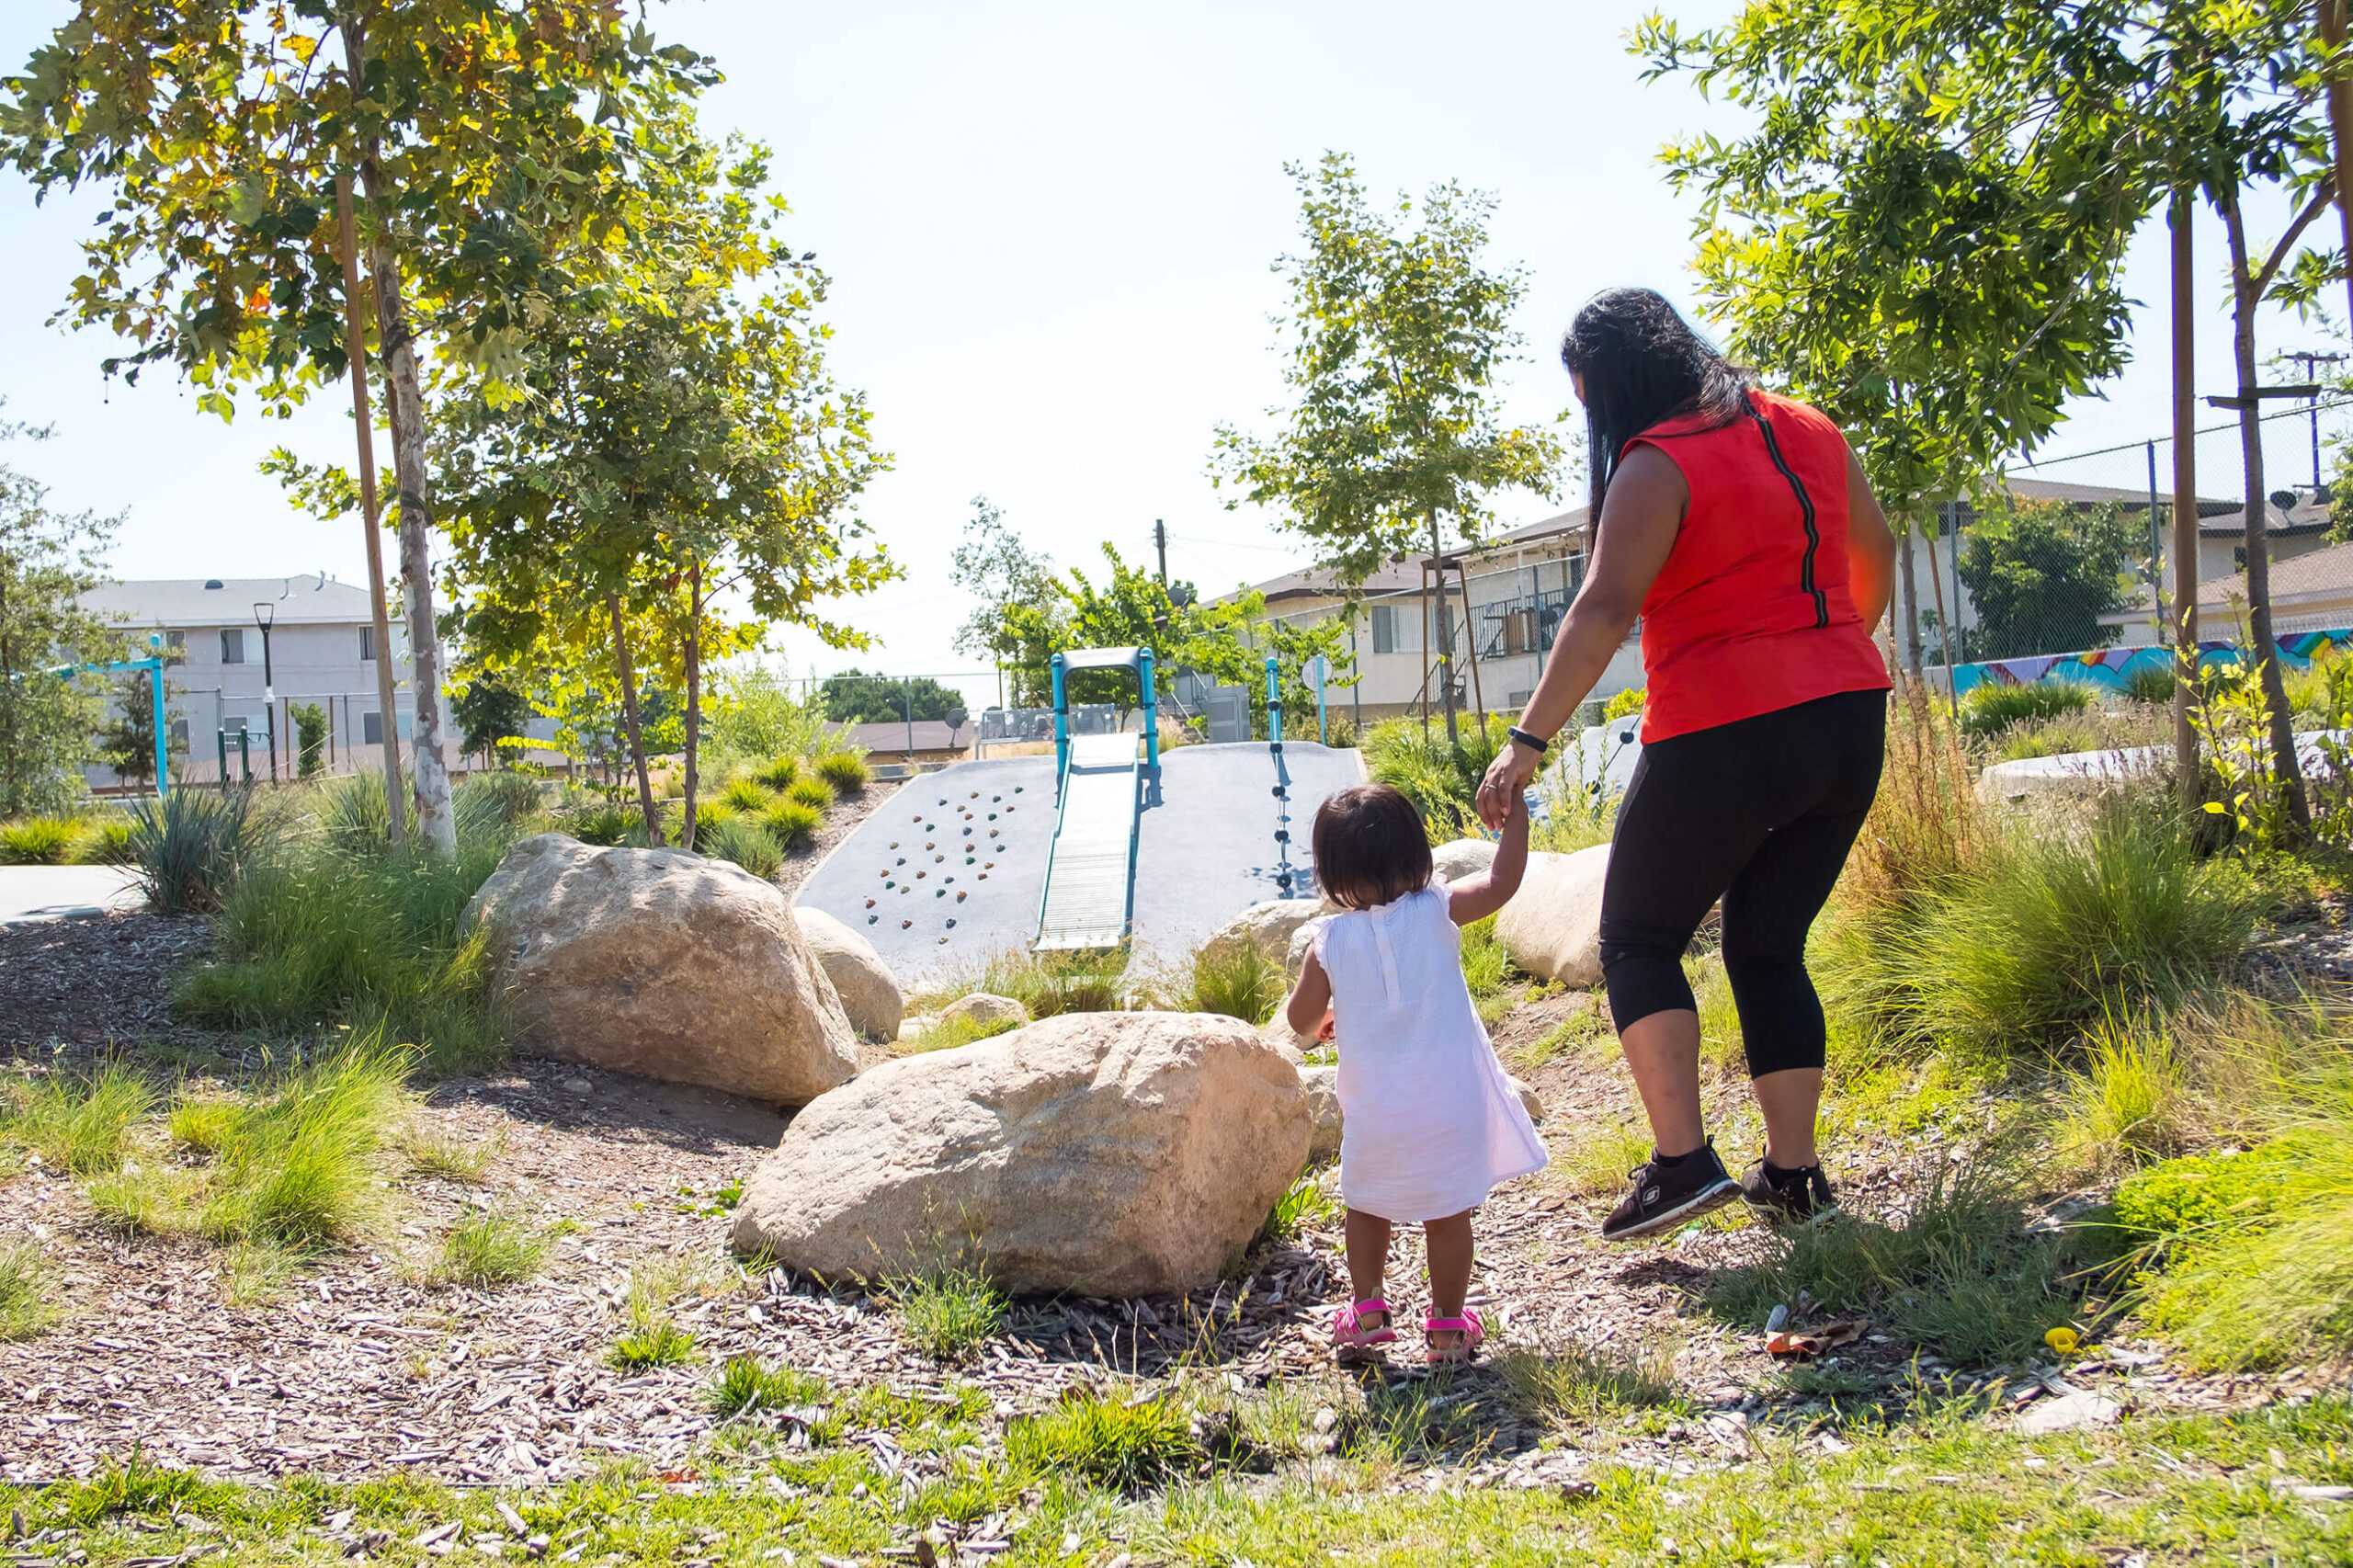 A woman with dark hair in a reddish-orange top leads a young girl in a white dress through a park with trees, a slide, grass, and boulders.